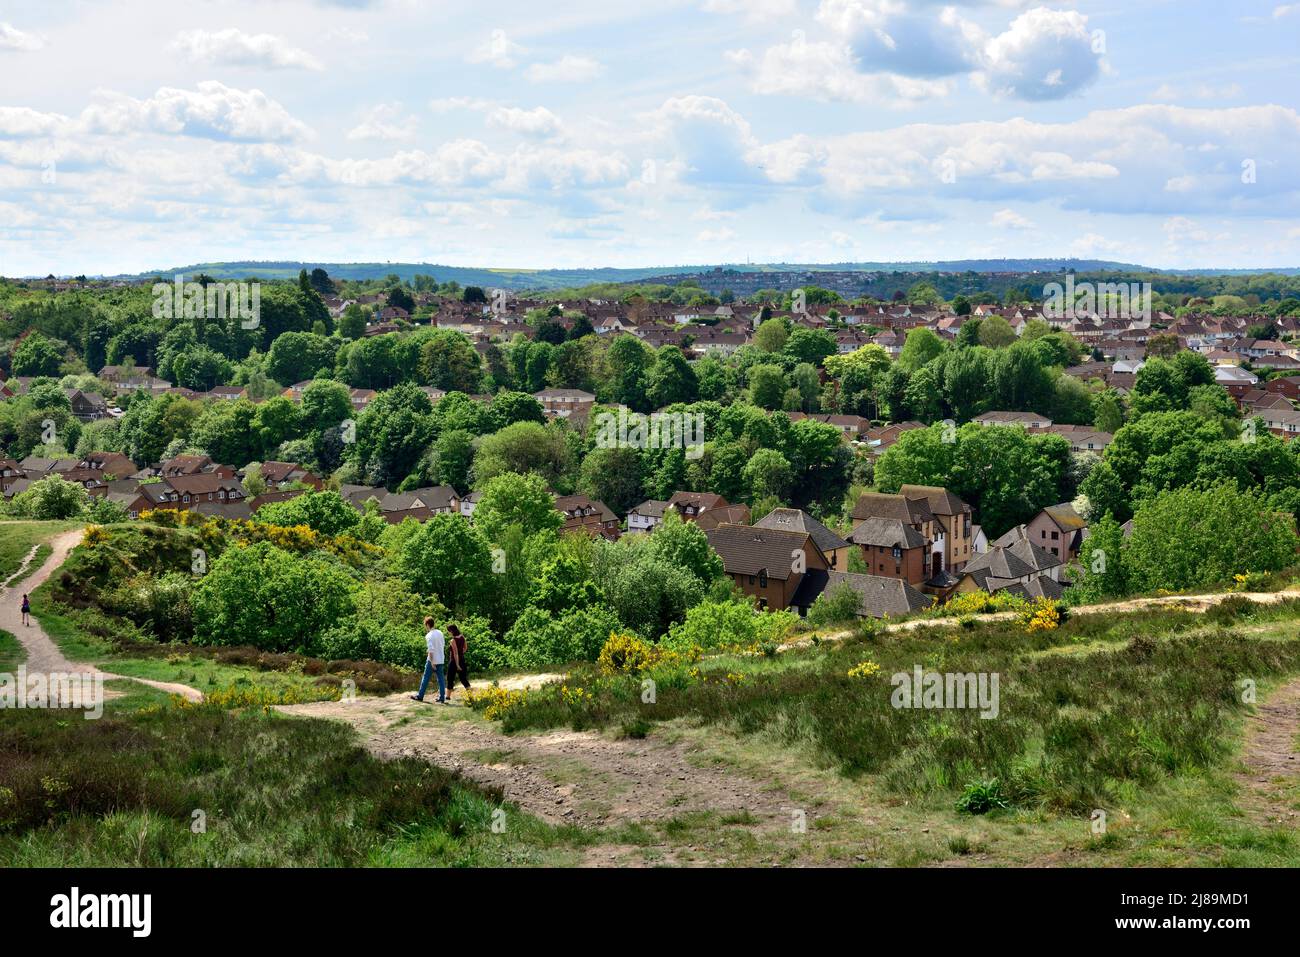 Looking south over trees and houses of Bristol from Troopers' Hill former mining area now park and nature reserve, UK Stock Photo